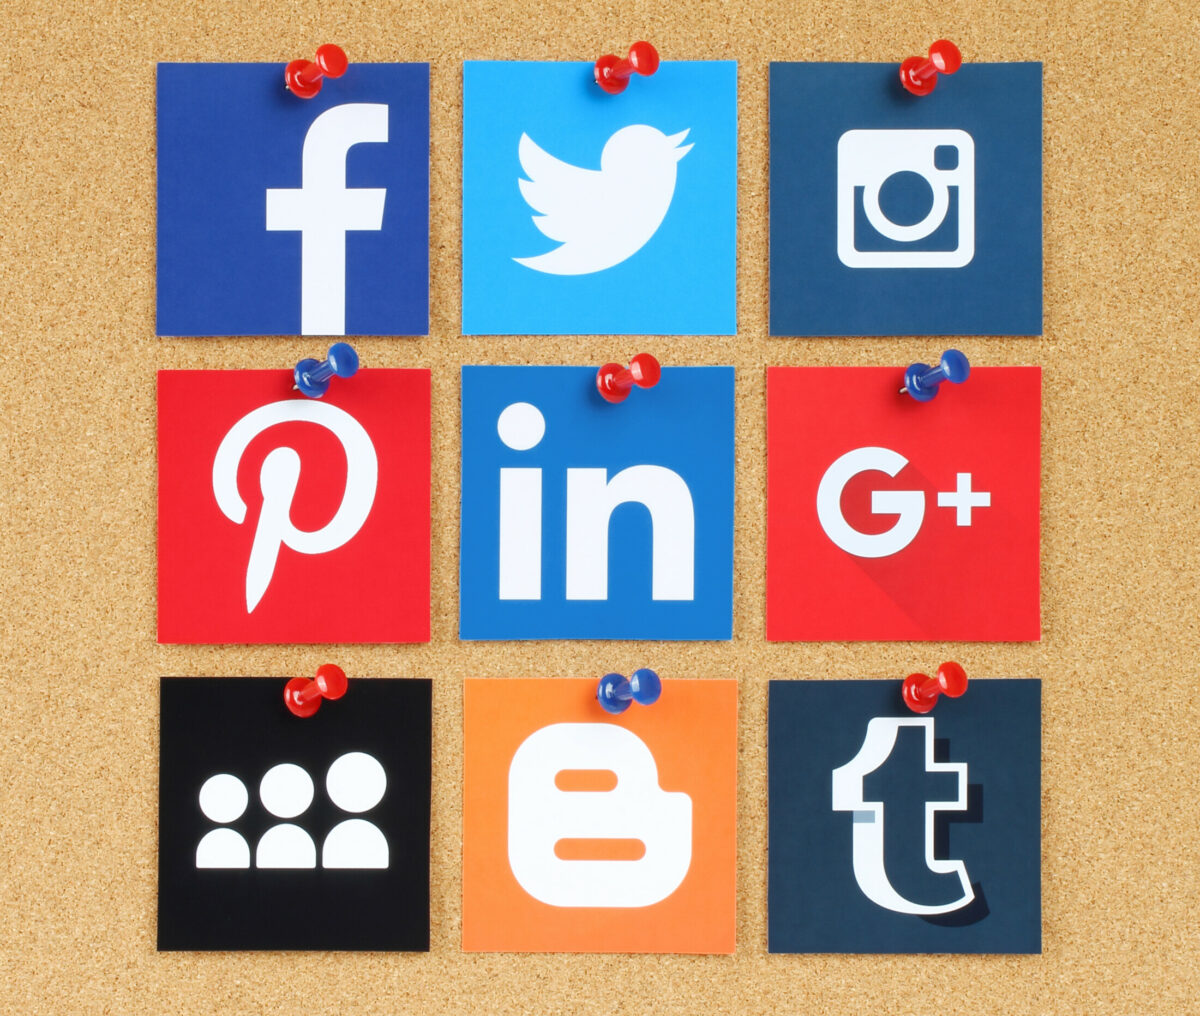 Converting your social media leads